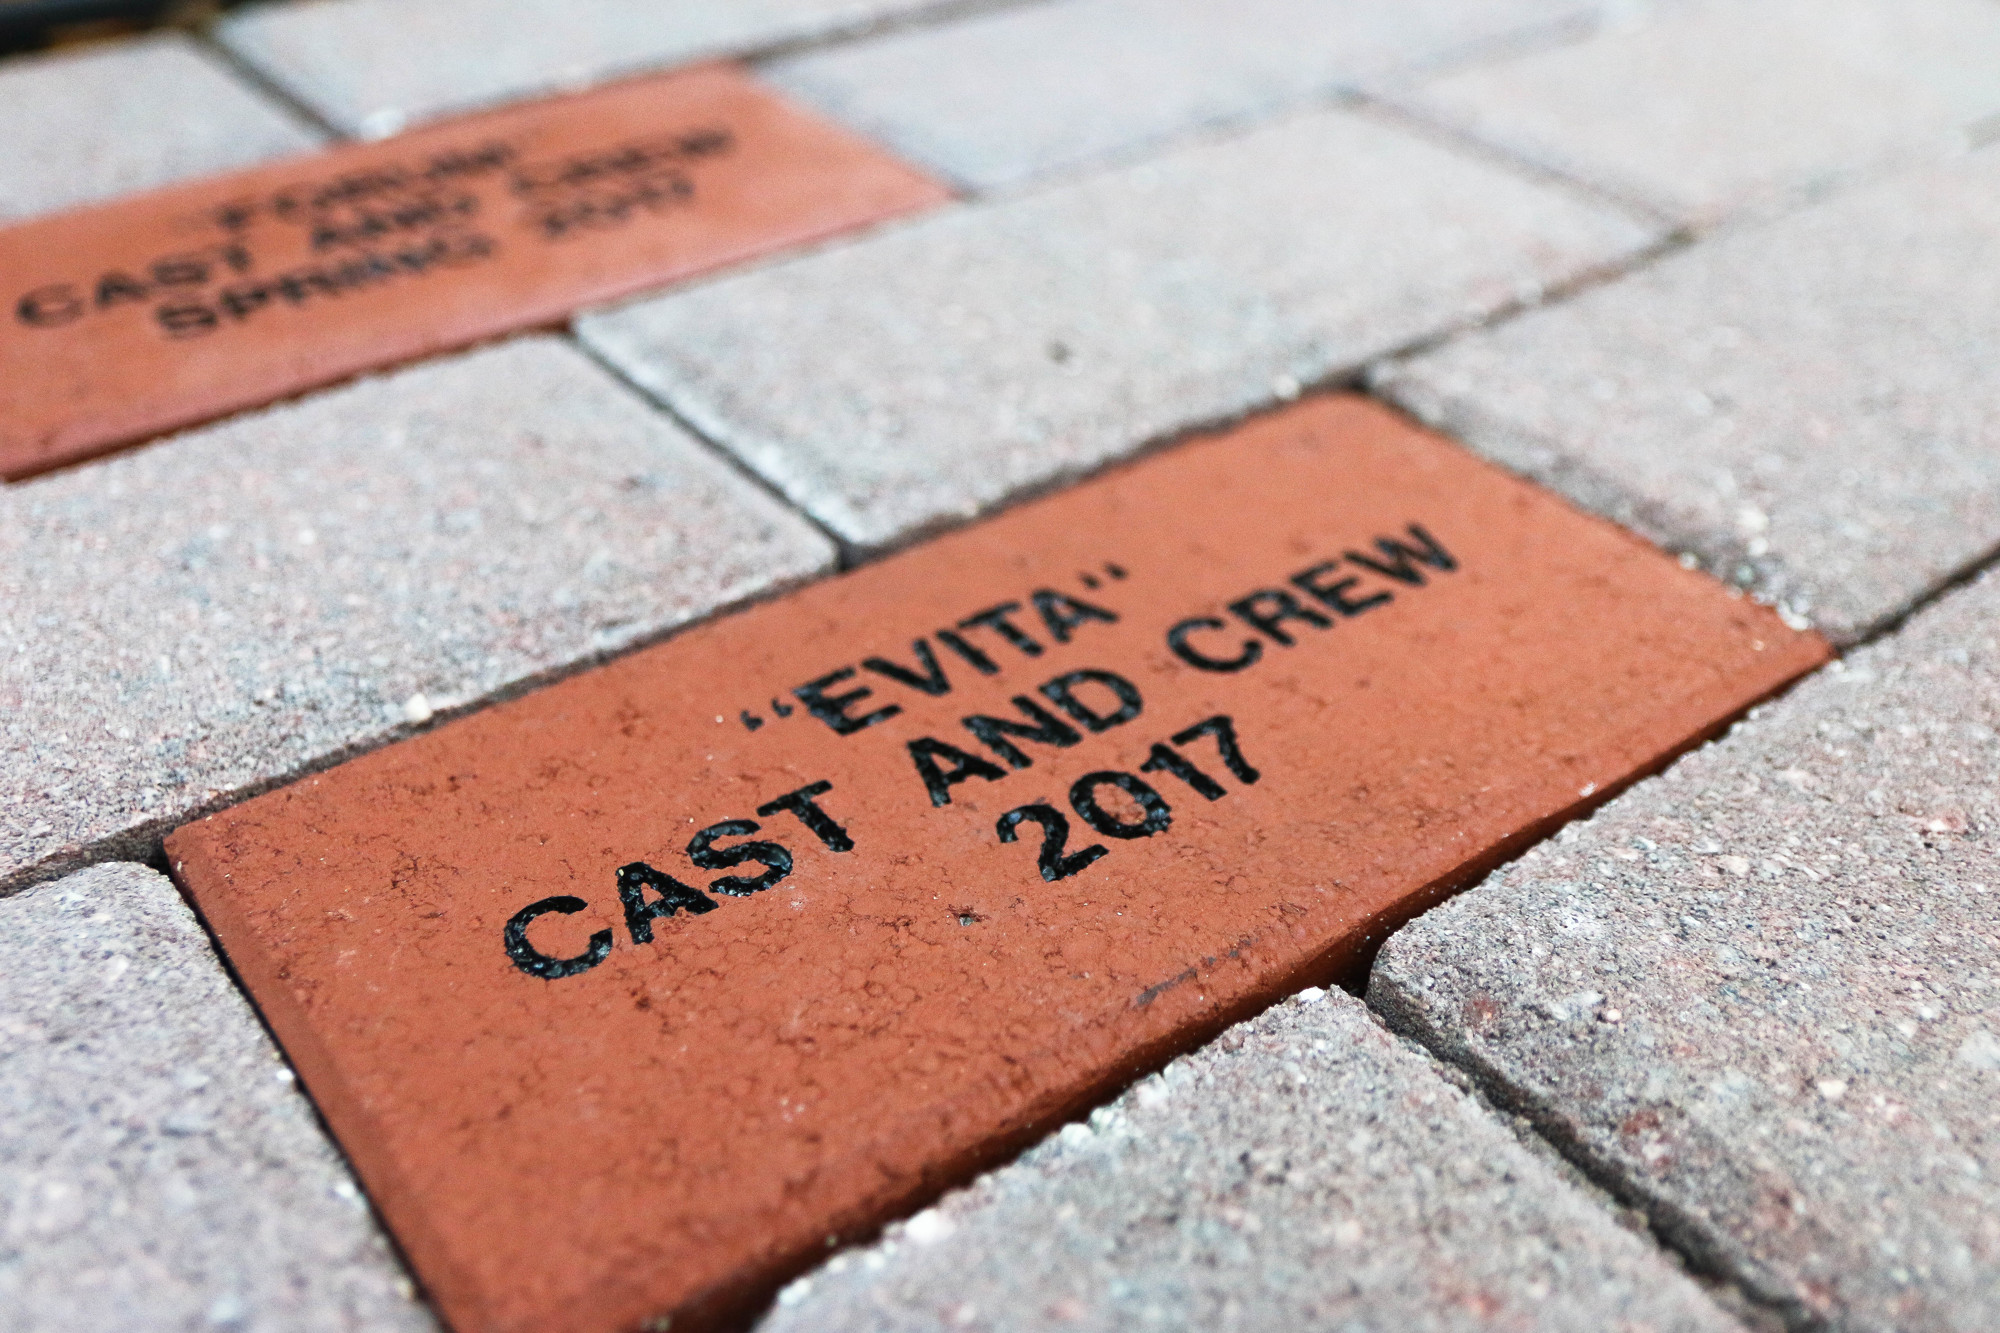 Personalized bricks are available for purchase to be placed in the atrium ground. Photo by Paige Wilson